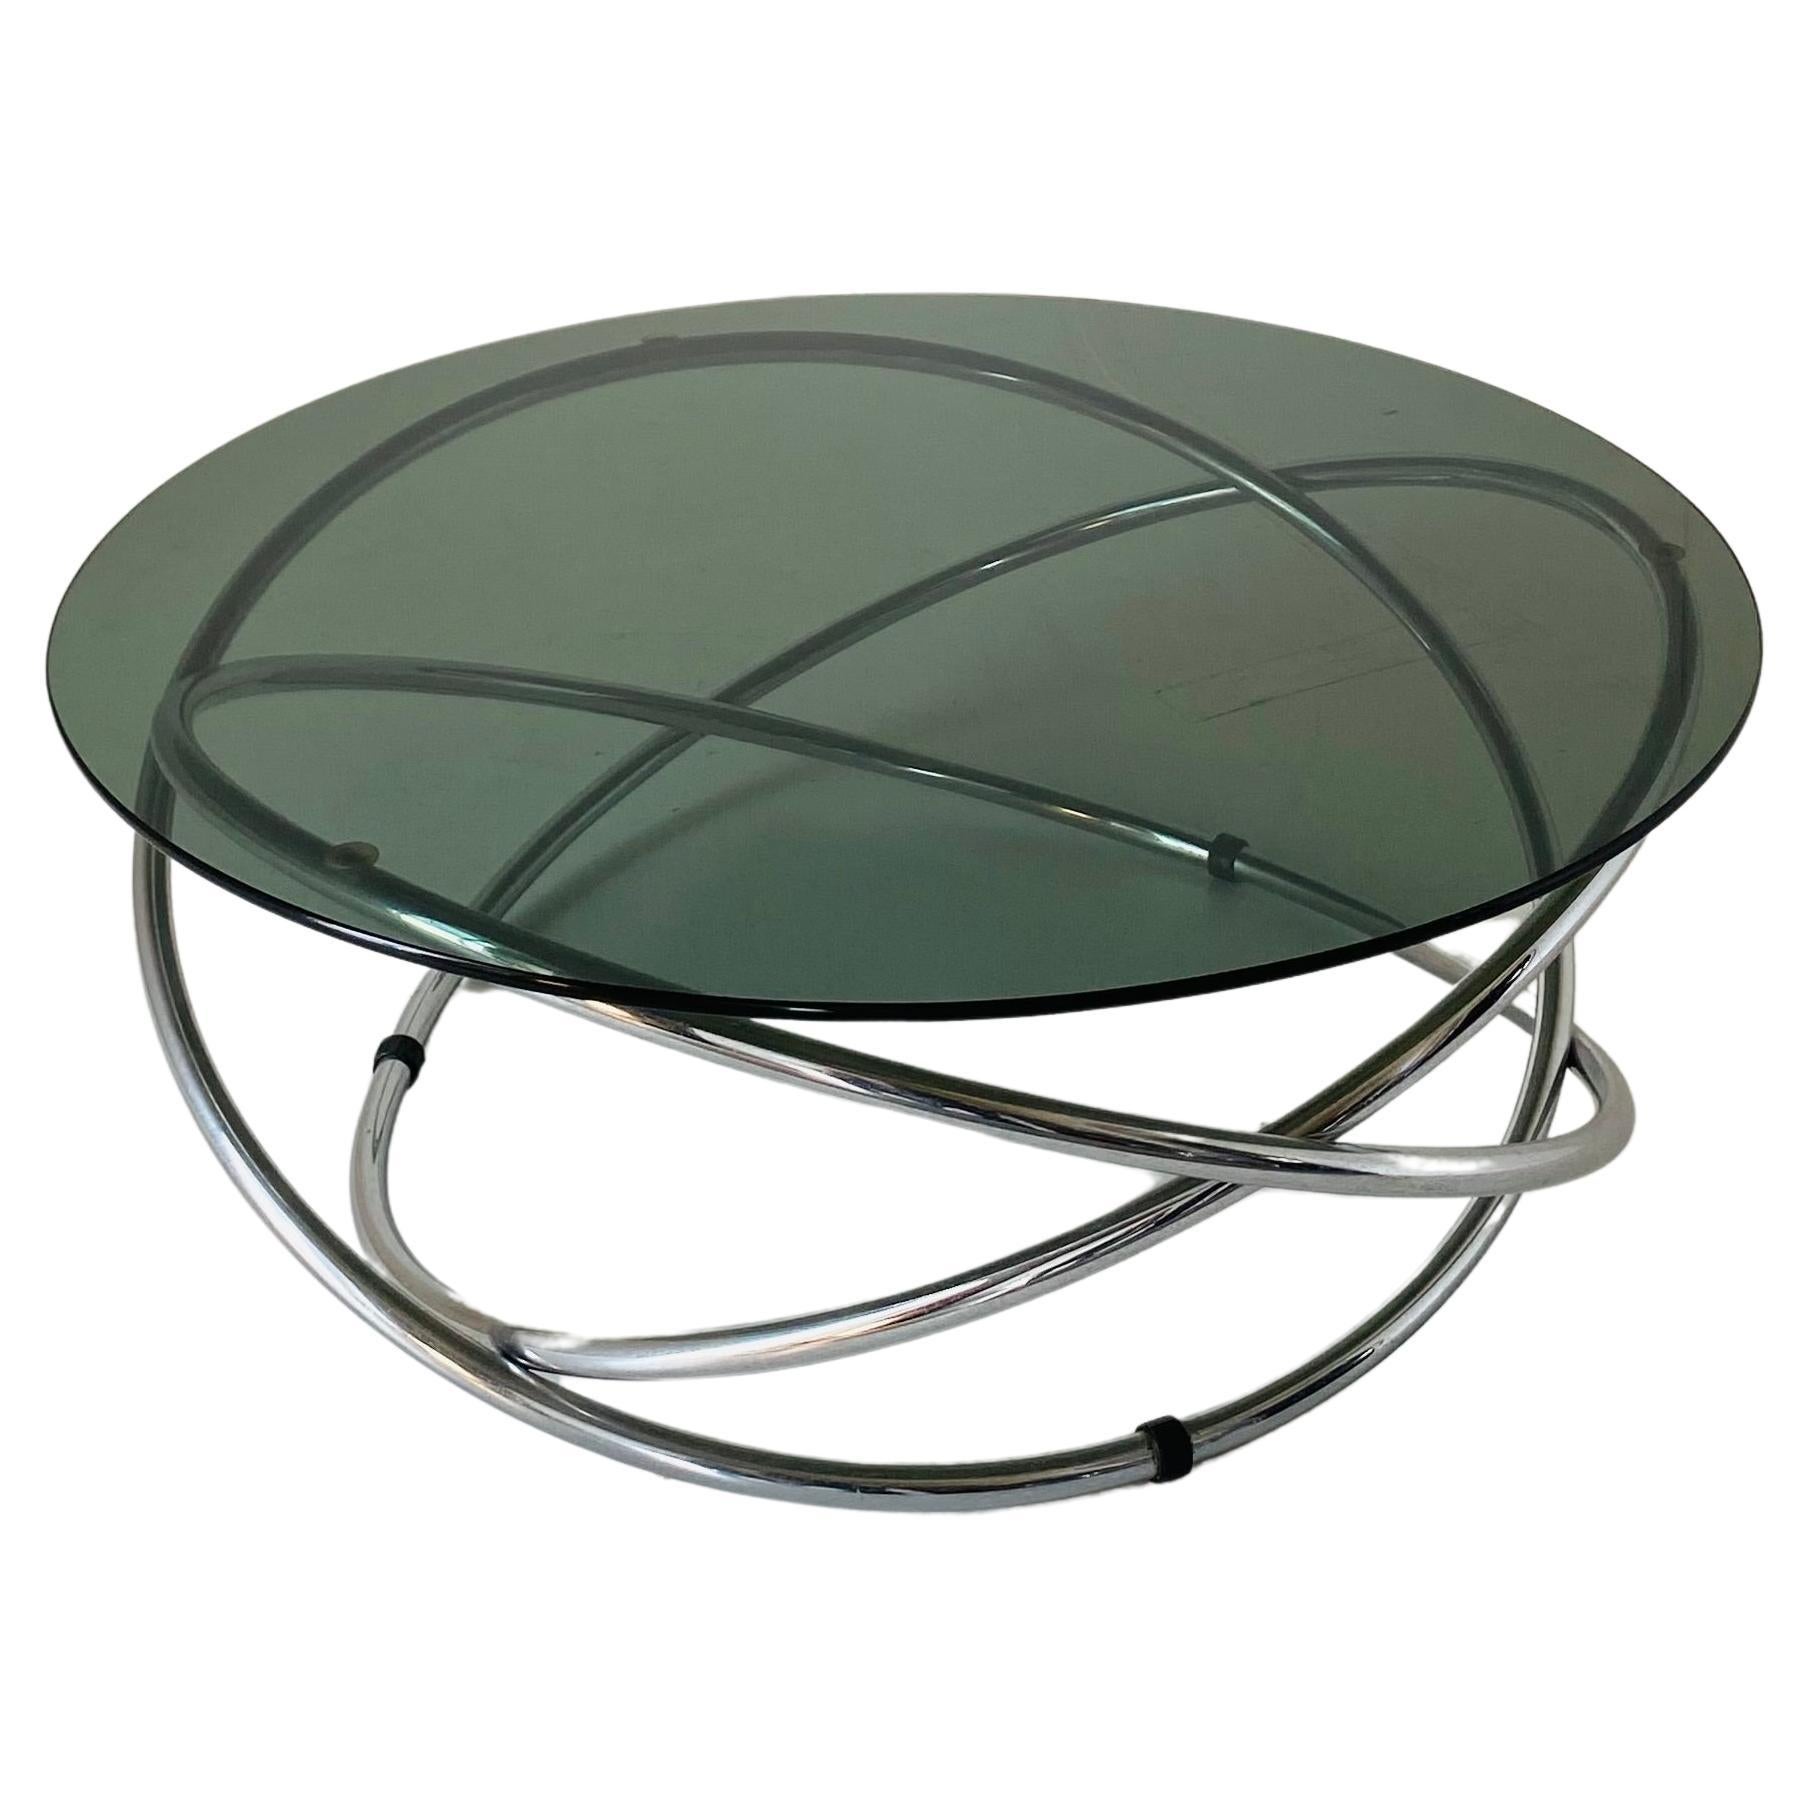 Vintage coffee table in space age style, Italy, 1970s